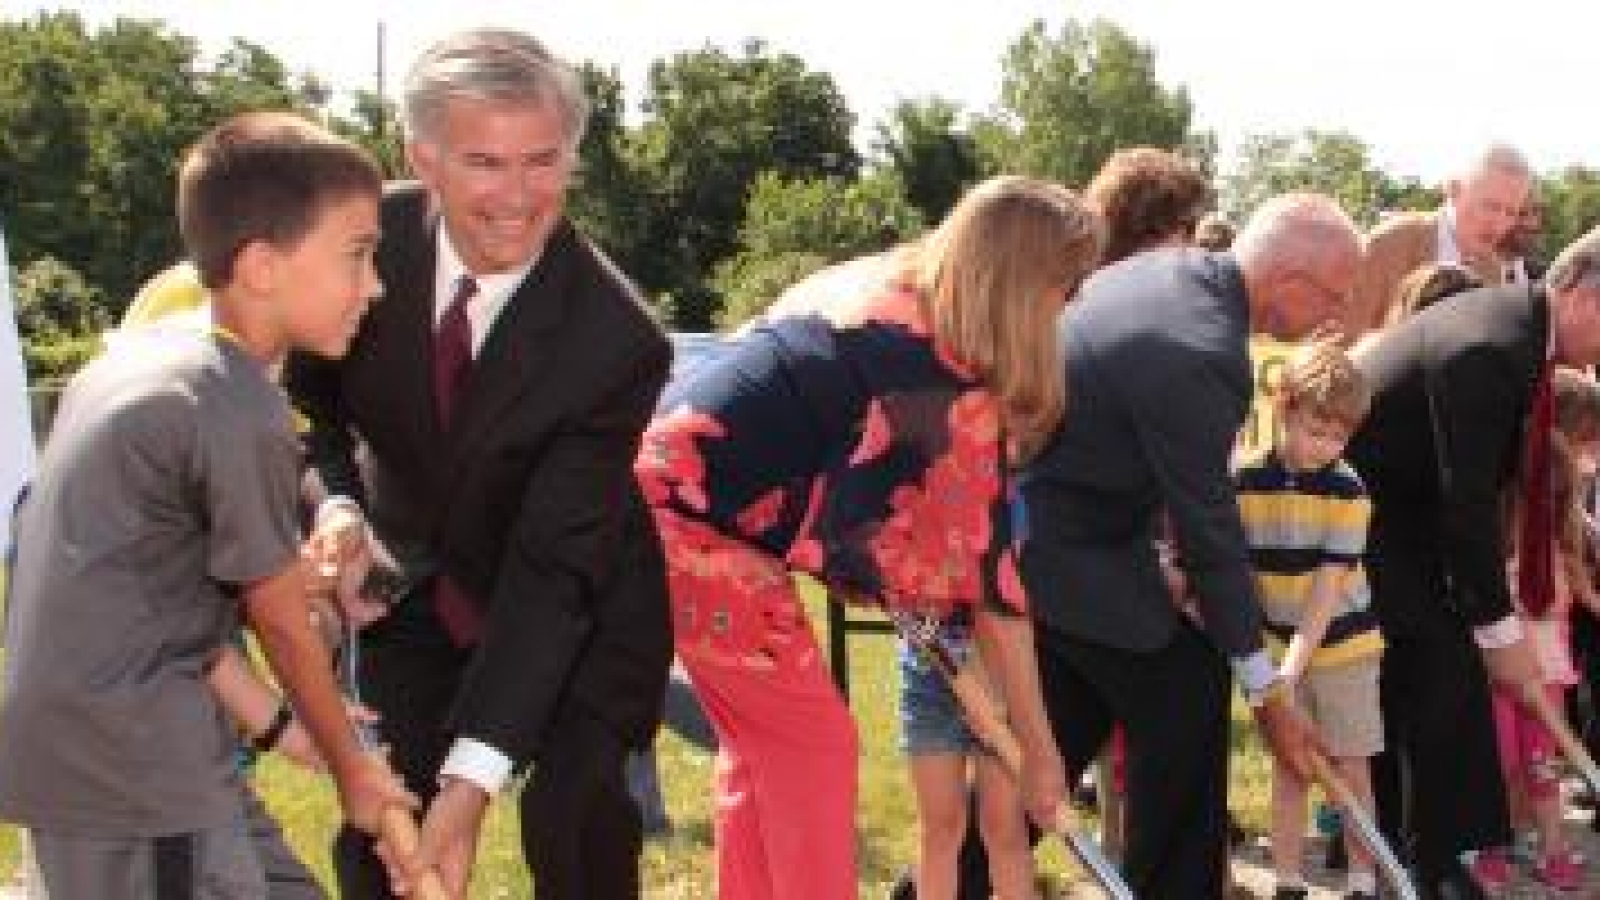 Community groundbreaking ceremony with a row of people with shovels in dirt